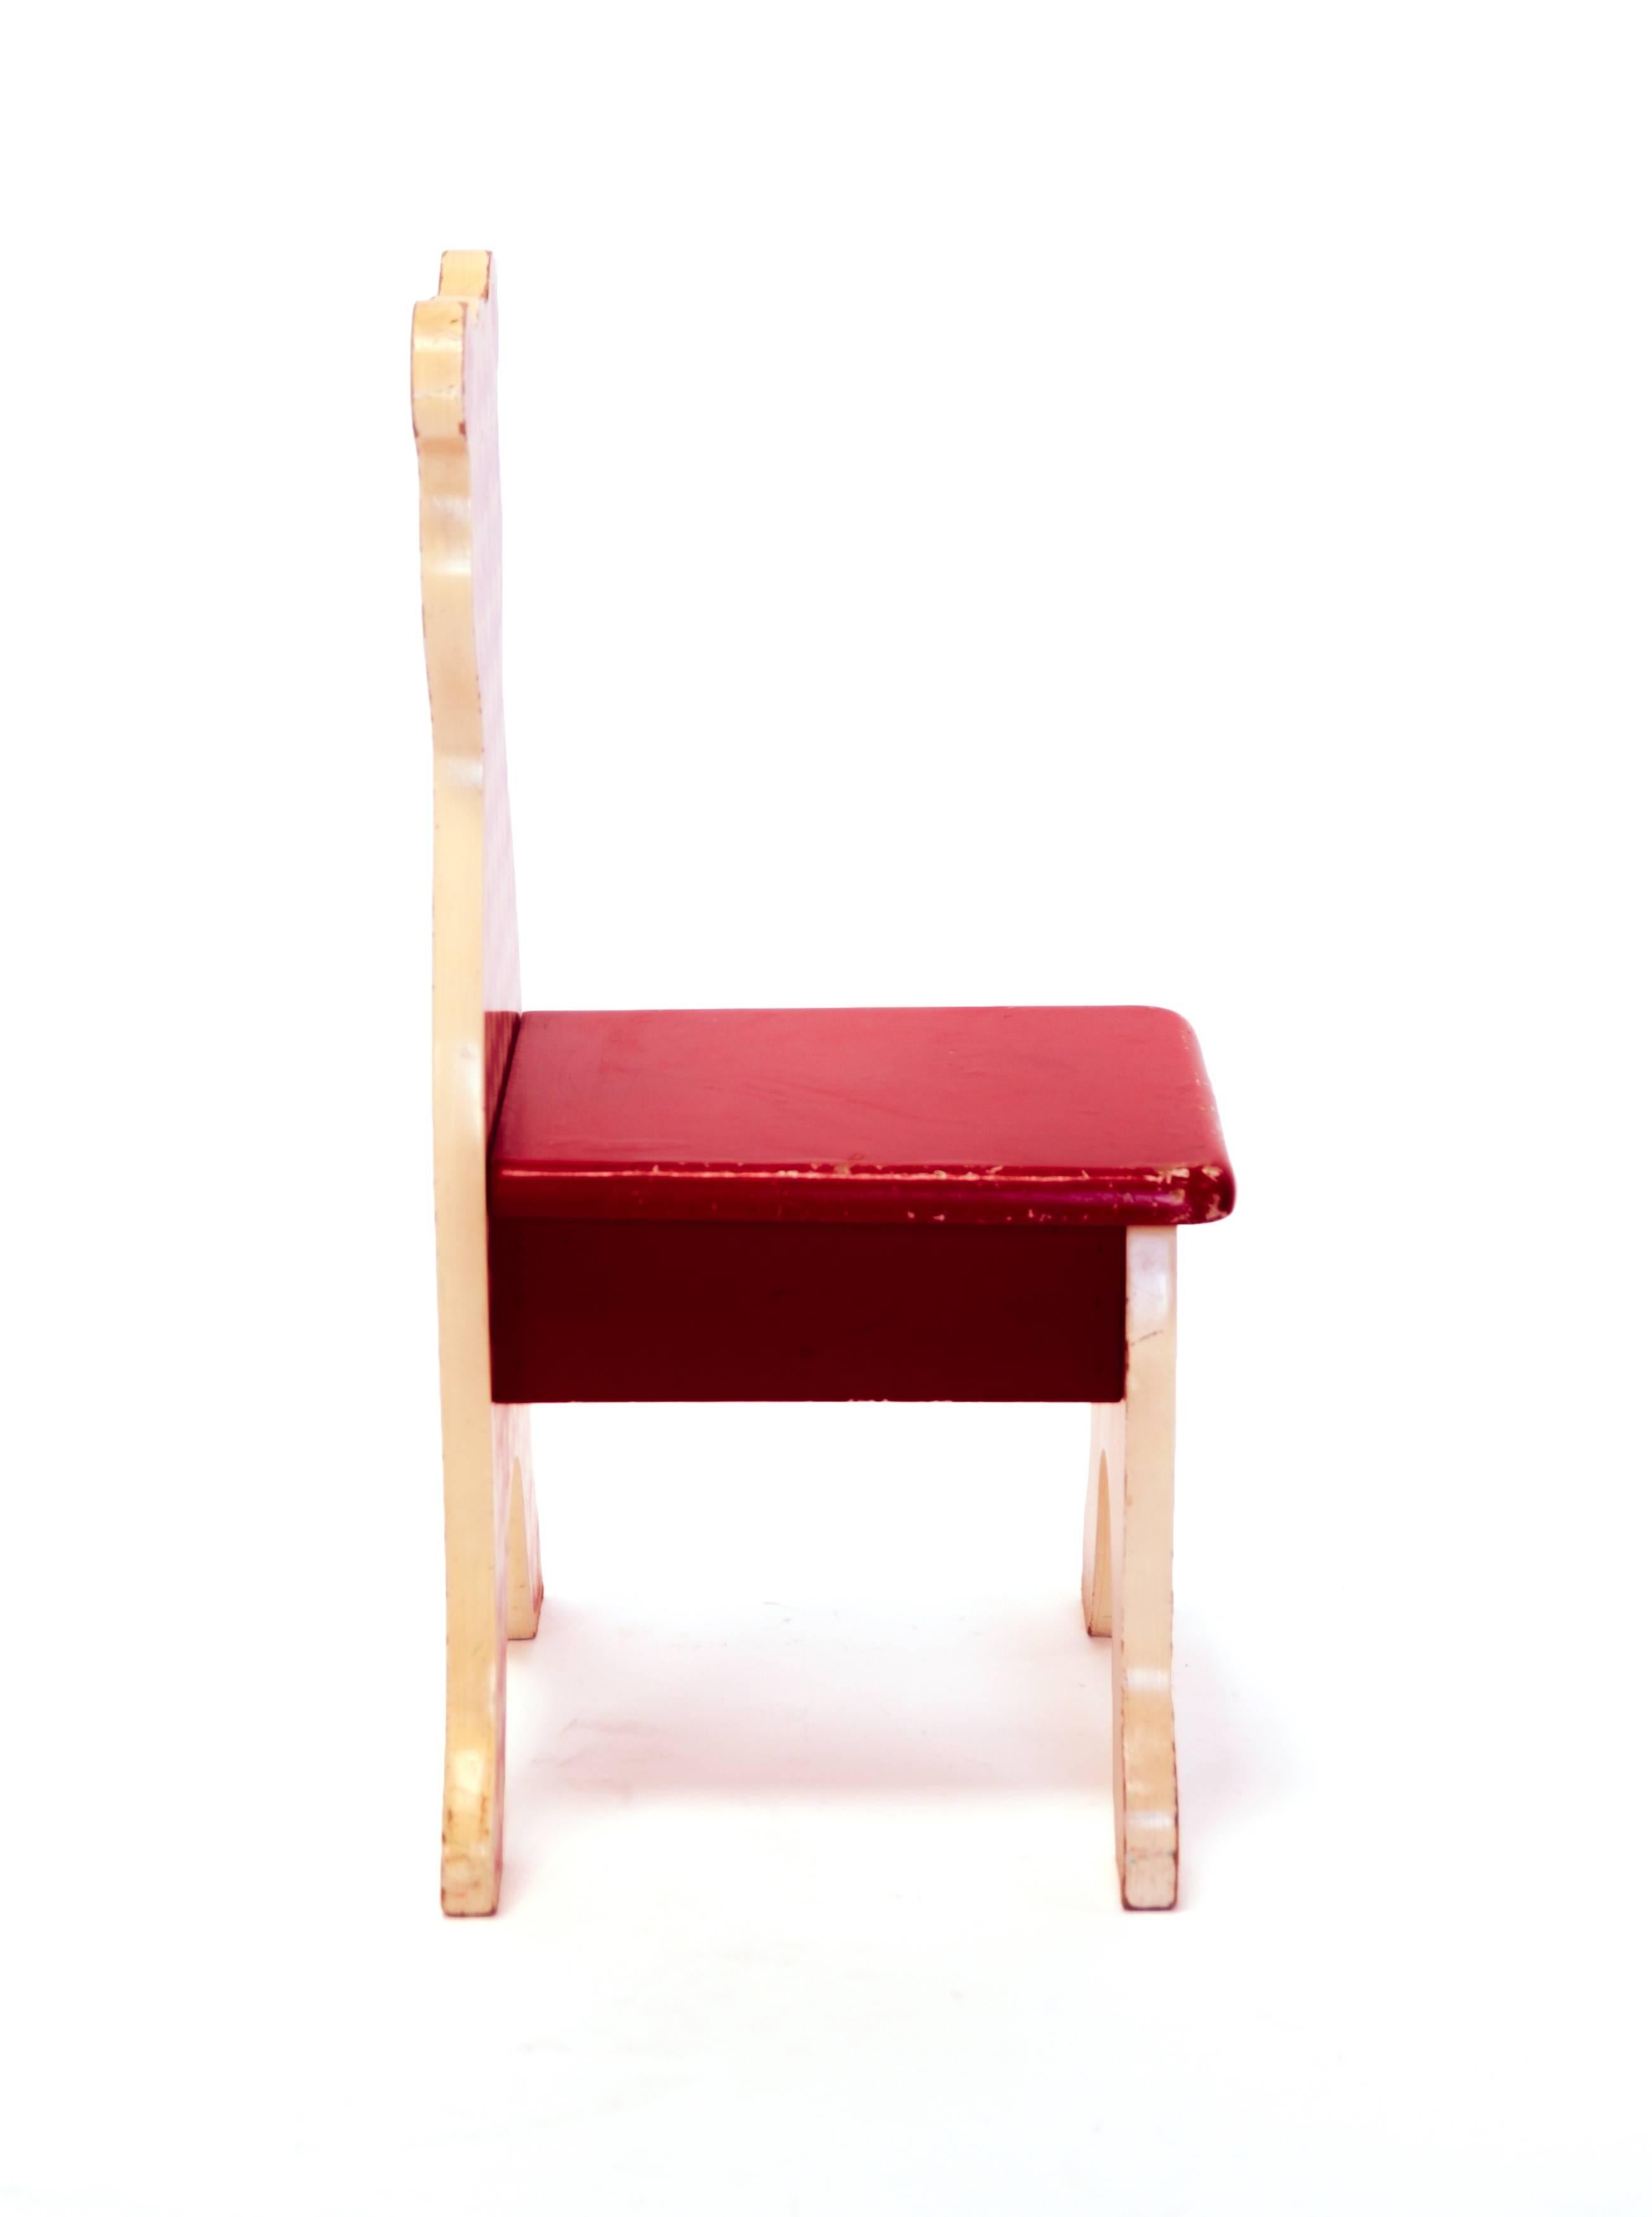 Bear chair, vintage, painted wood composite

Vintage
Painted wood composite
Measures: H 23 in, W 10 in, D 10 in.

 